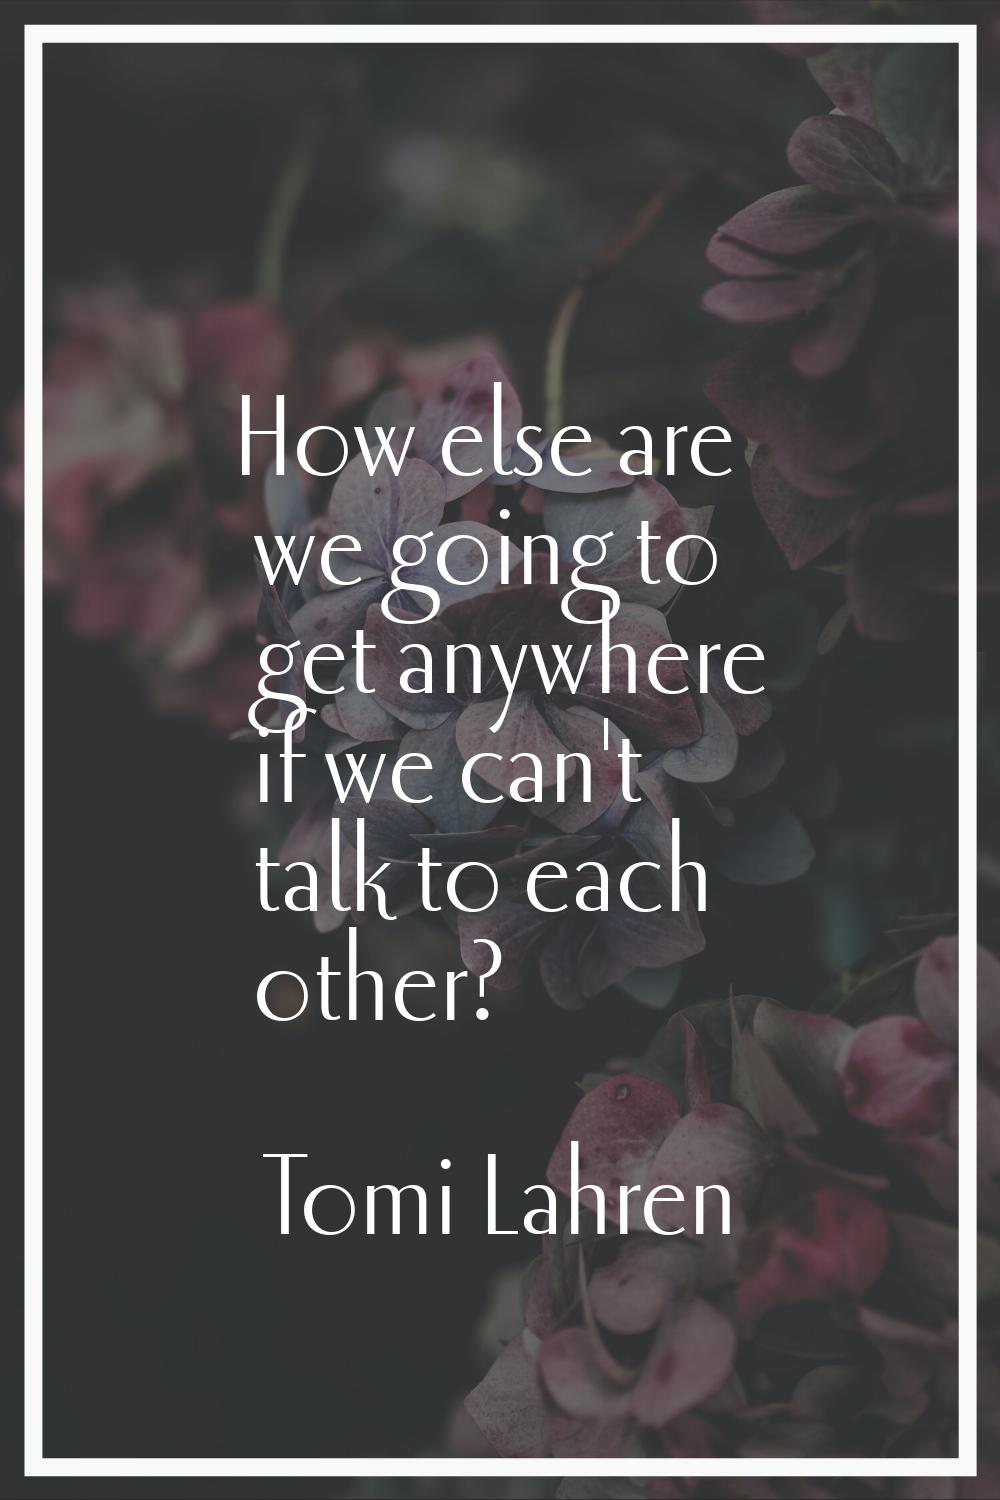 How else are we going to get anywhere if we can't talk to each other?